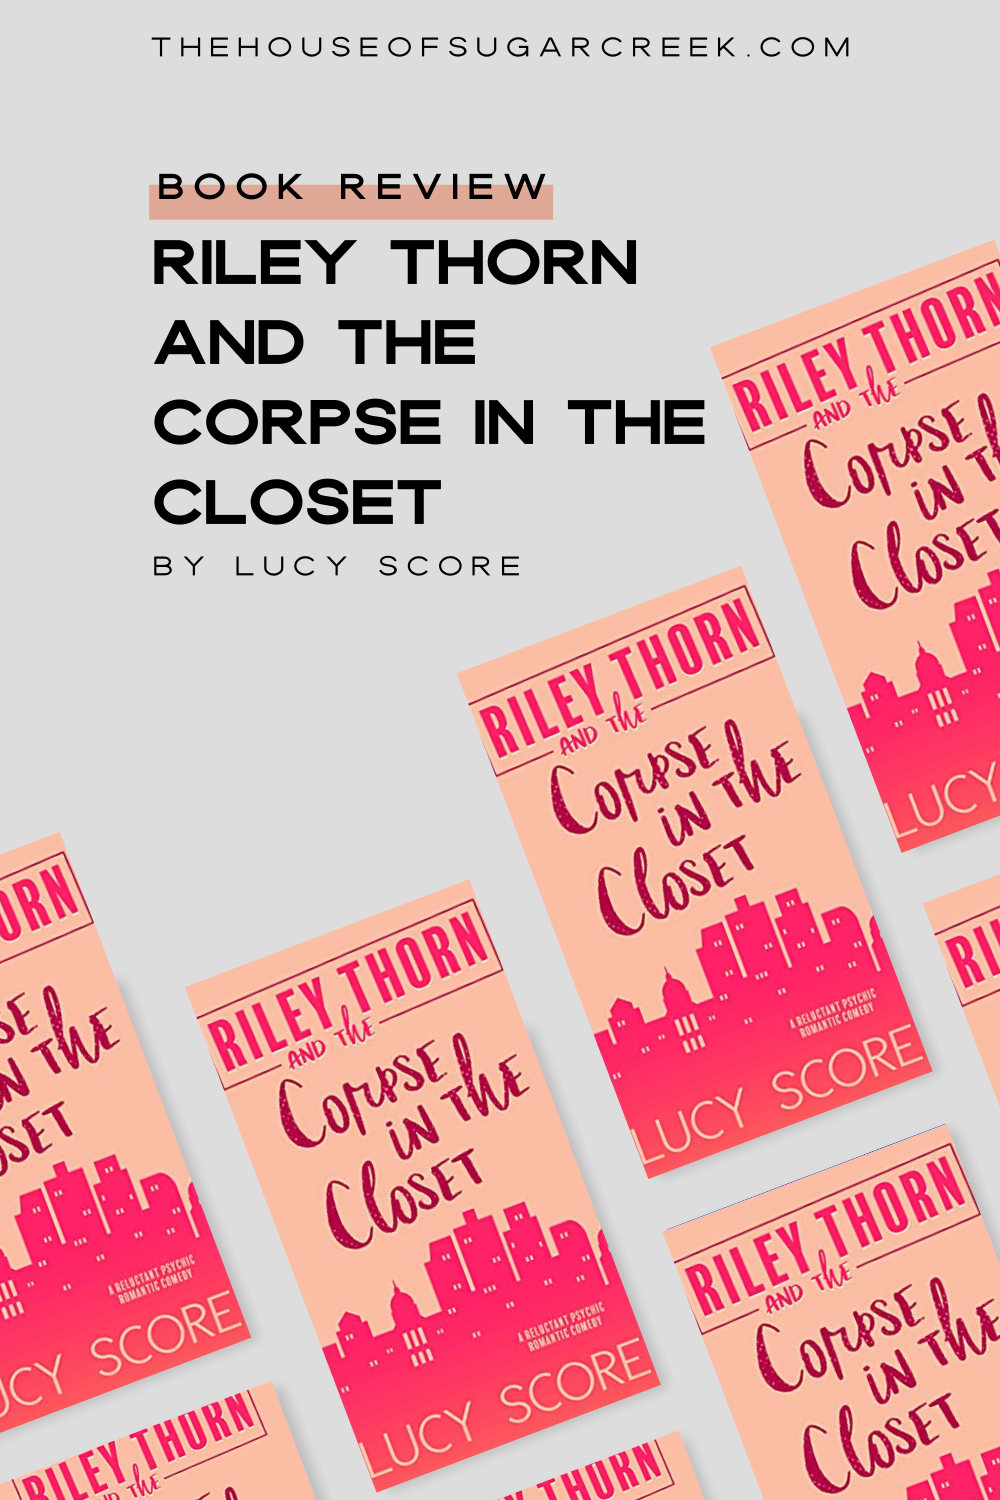 Book Review - Riley Thorn and the Corpse in the Closet by Lucy Score